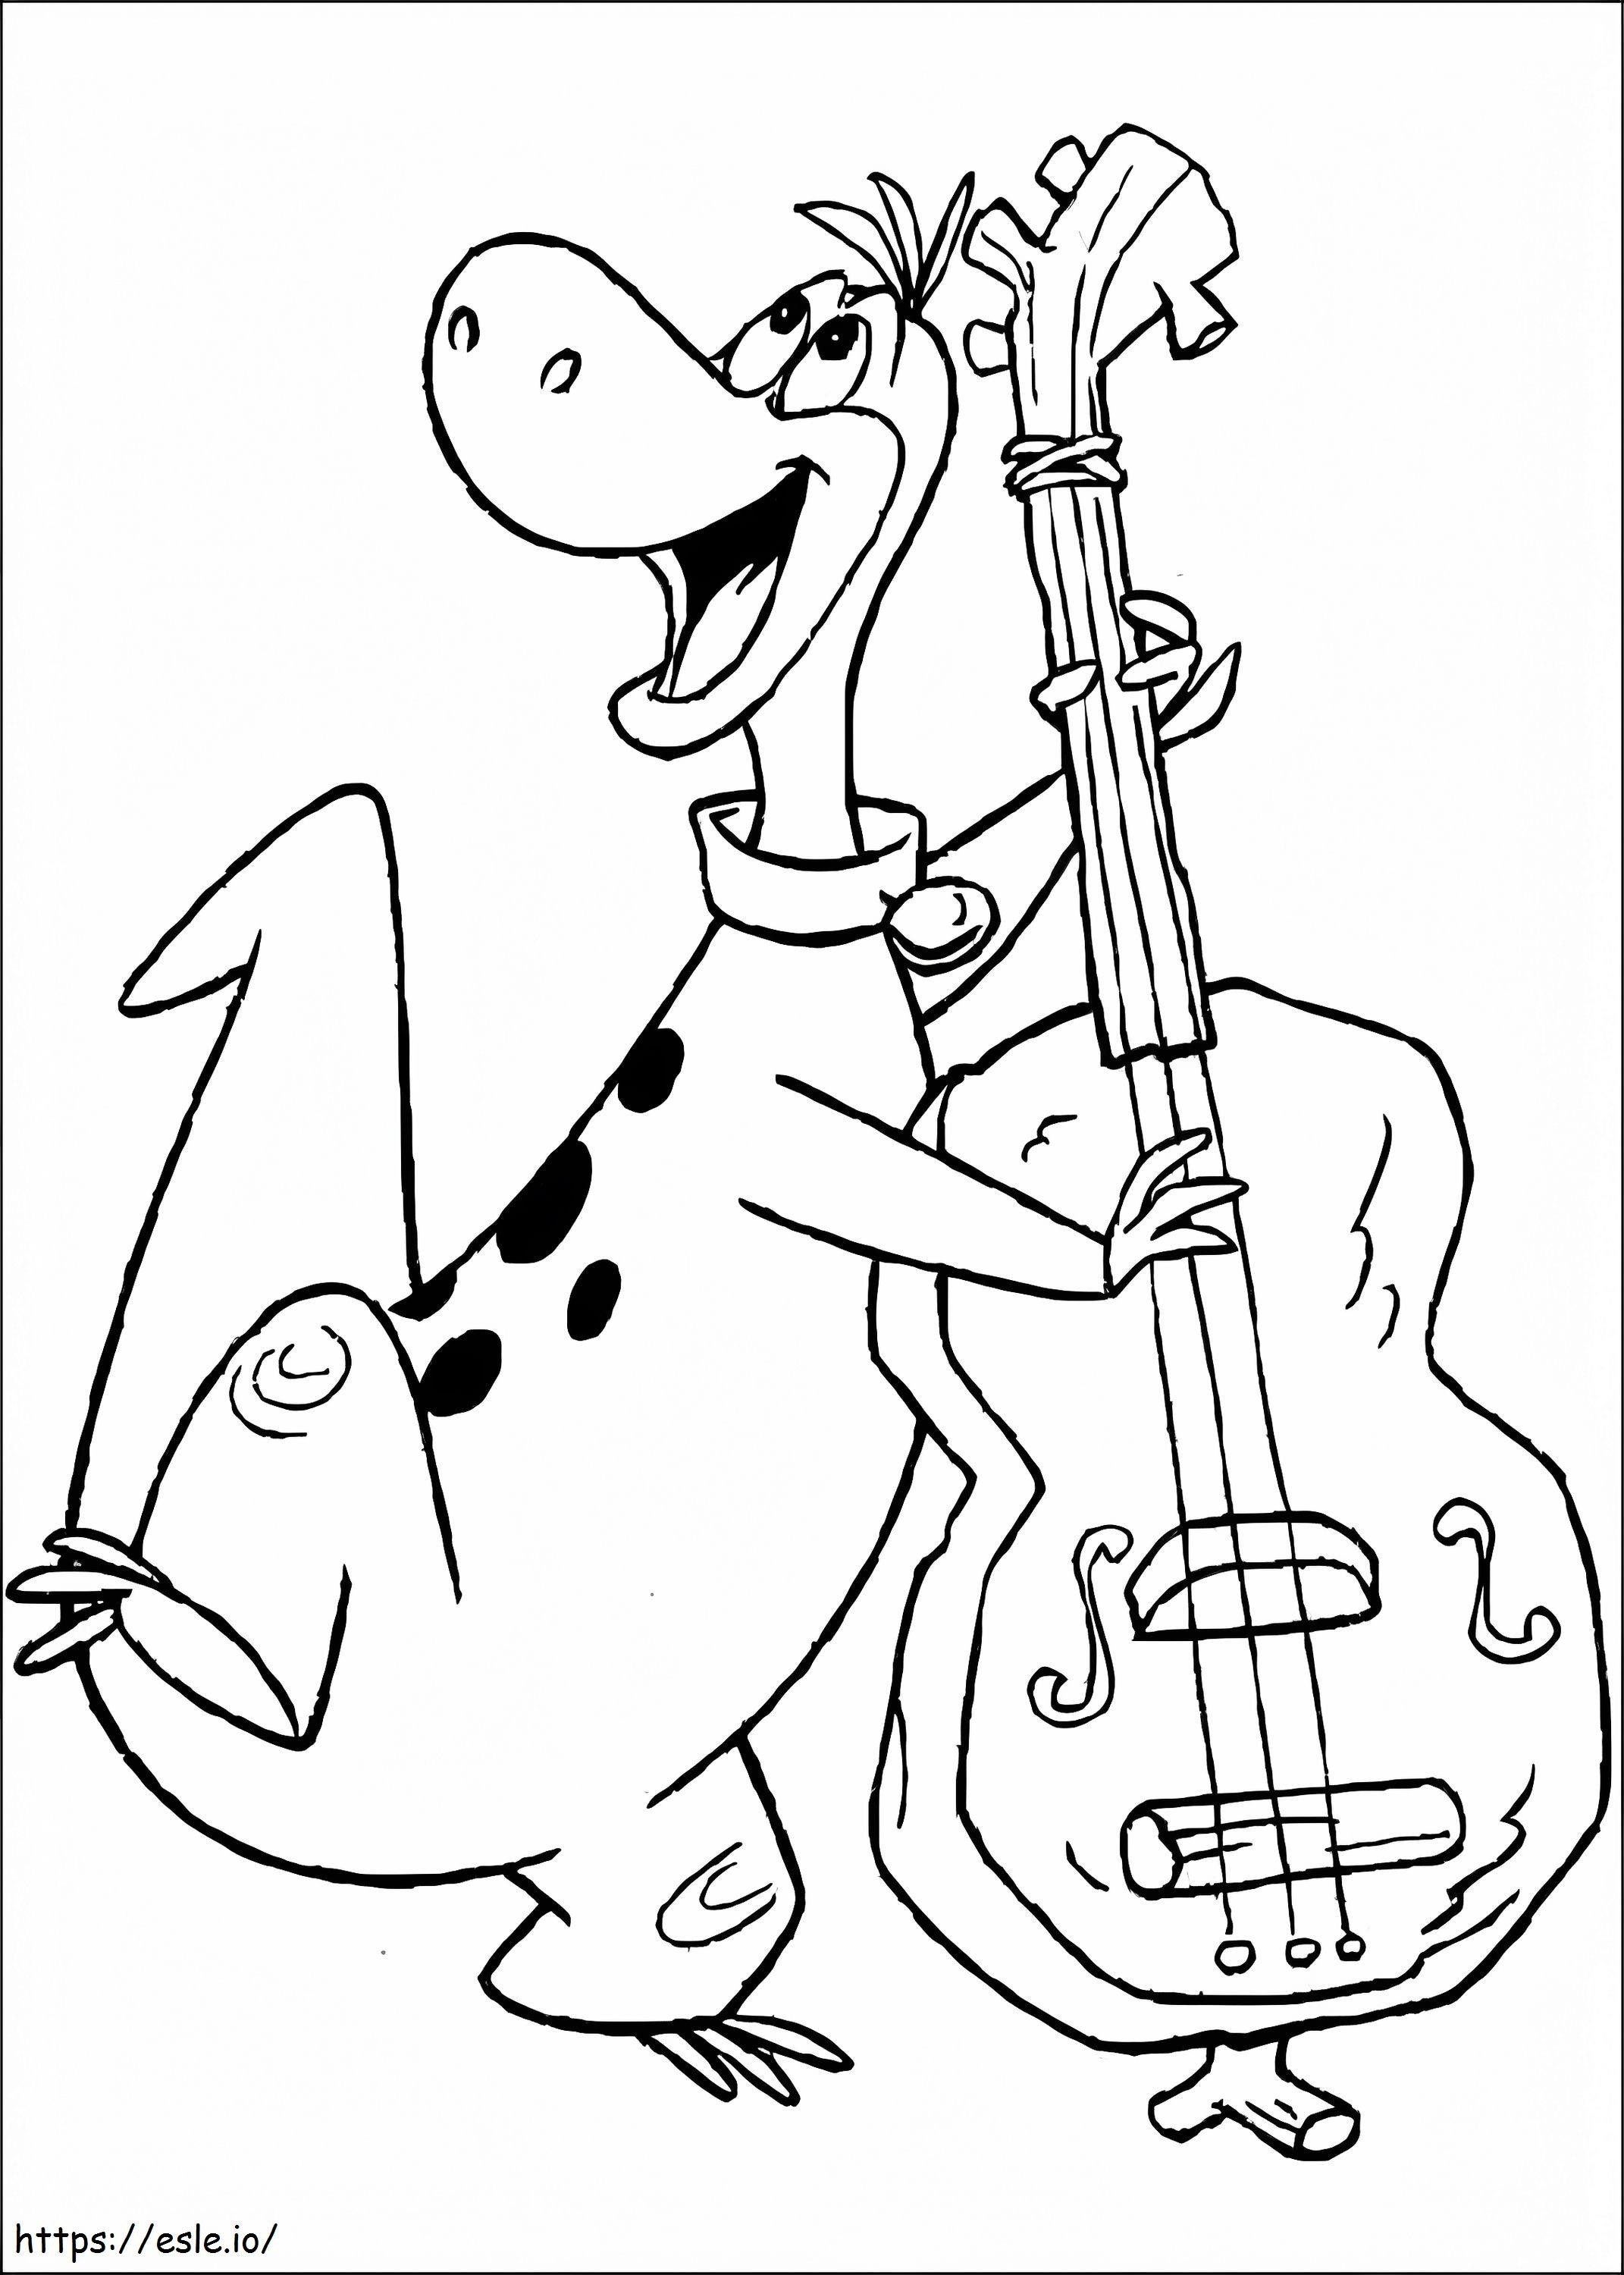 Dino From The Flintstones coloring page